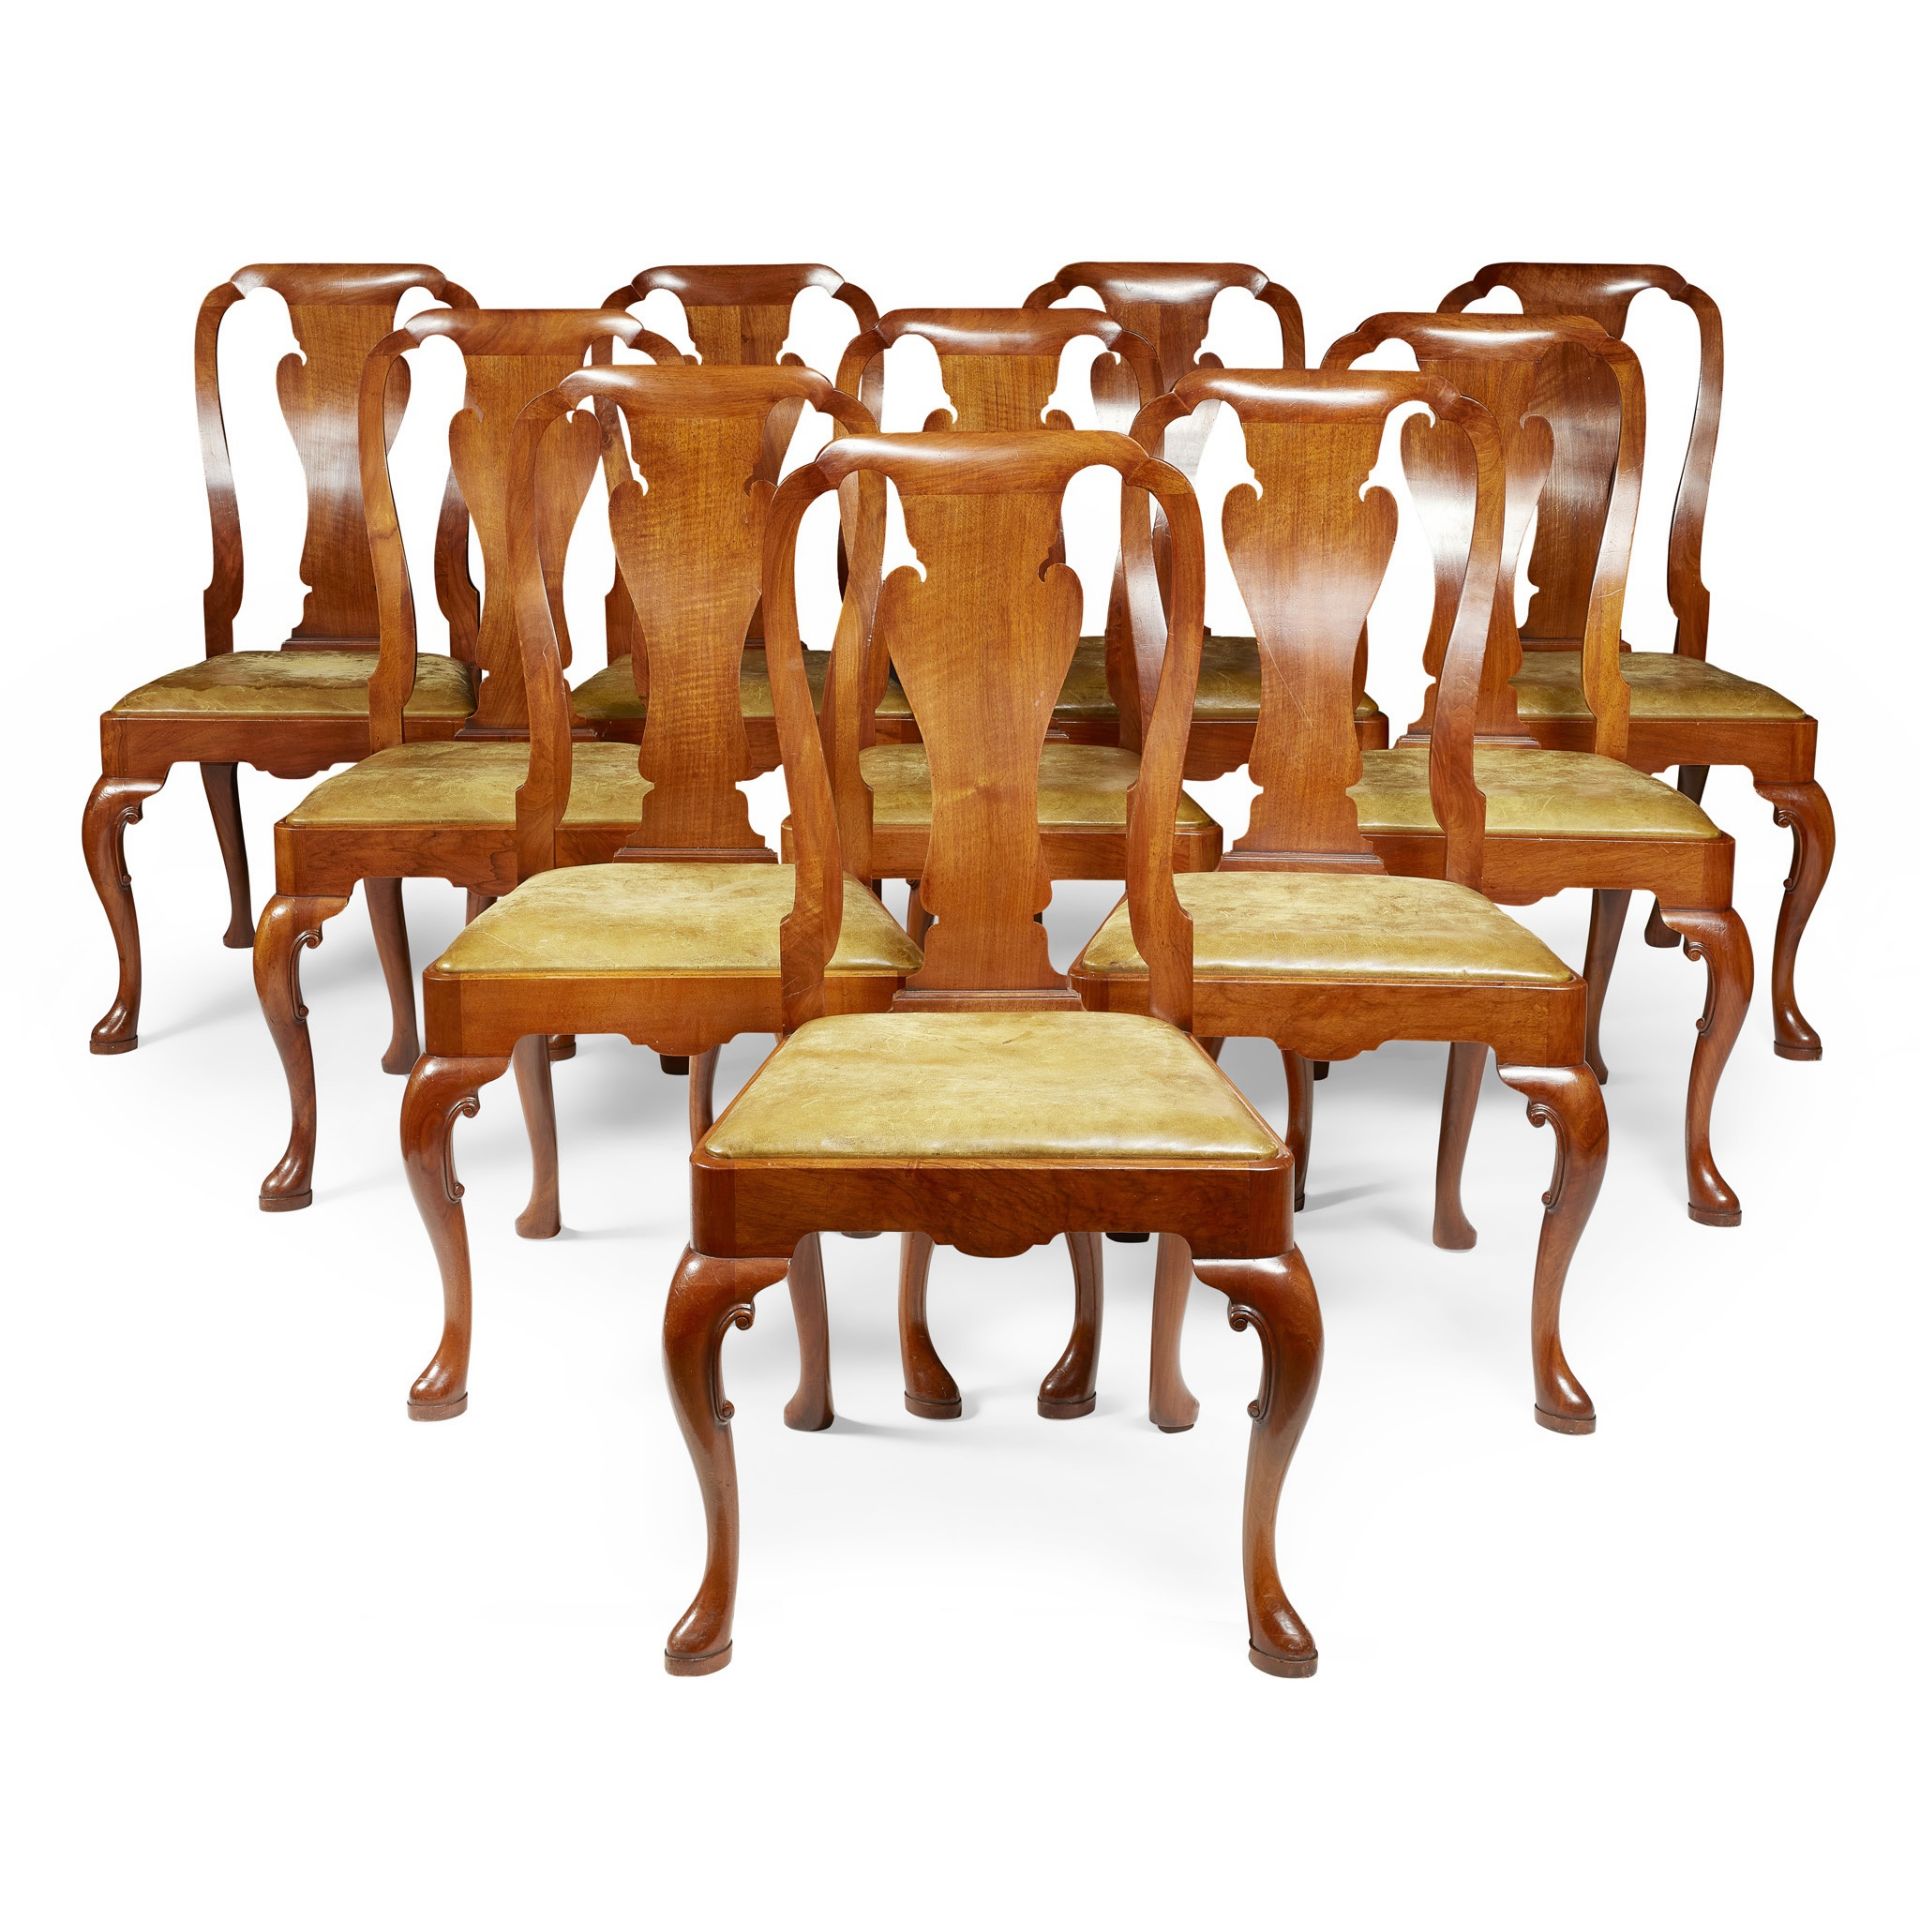 SET OF TWELVE QUEEN ANNE STYLE WALNUT DINING CHAIRS LATE 19TH CENTURY/ EARLY 20TH CENTURY - Image 2 of 3